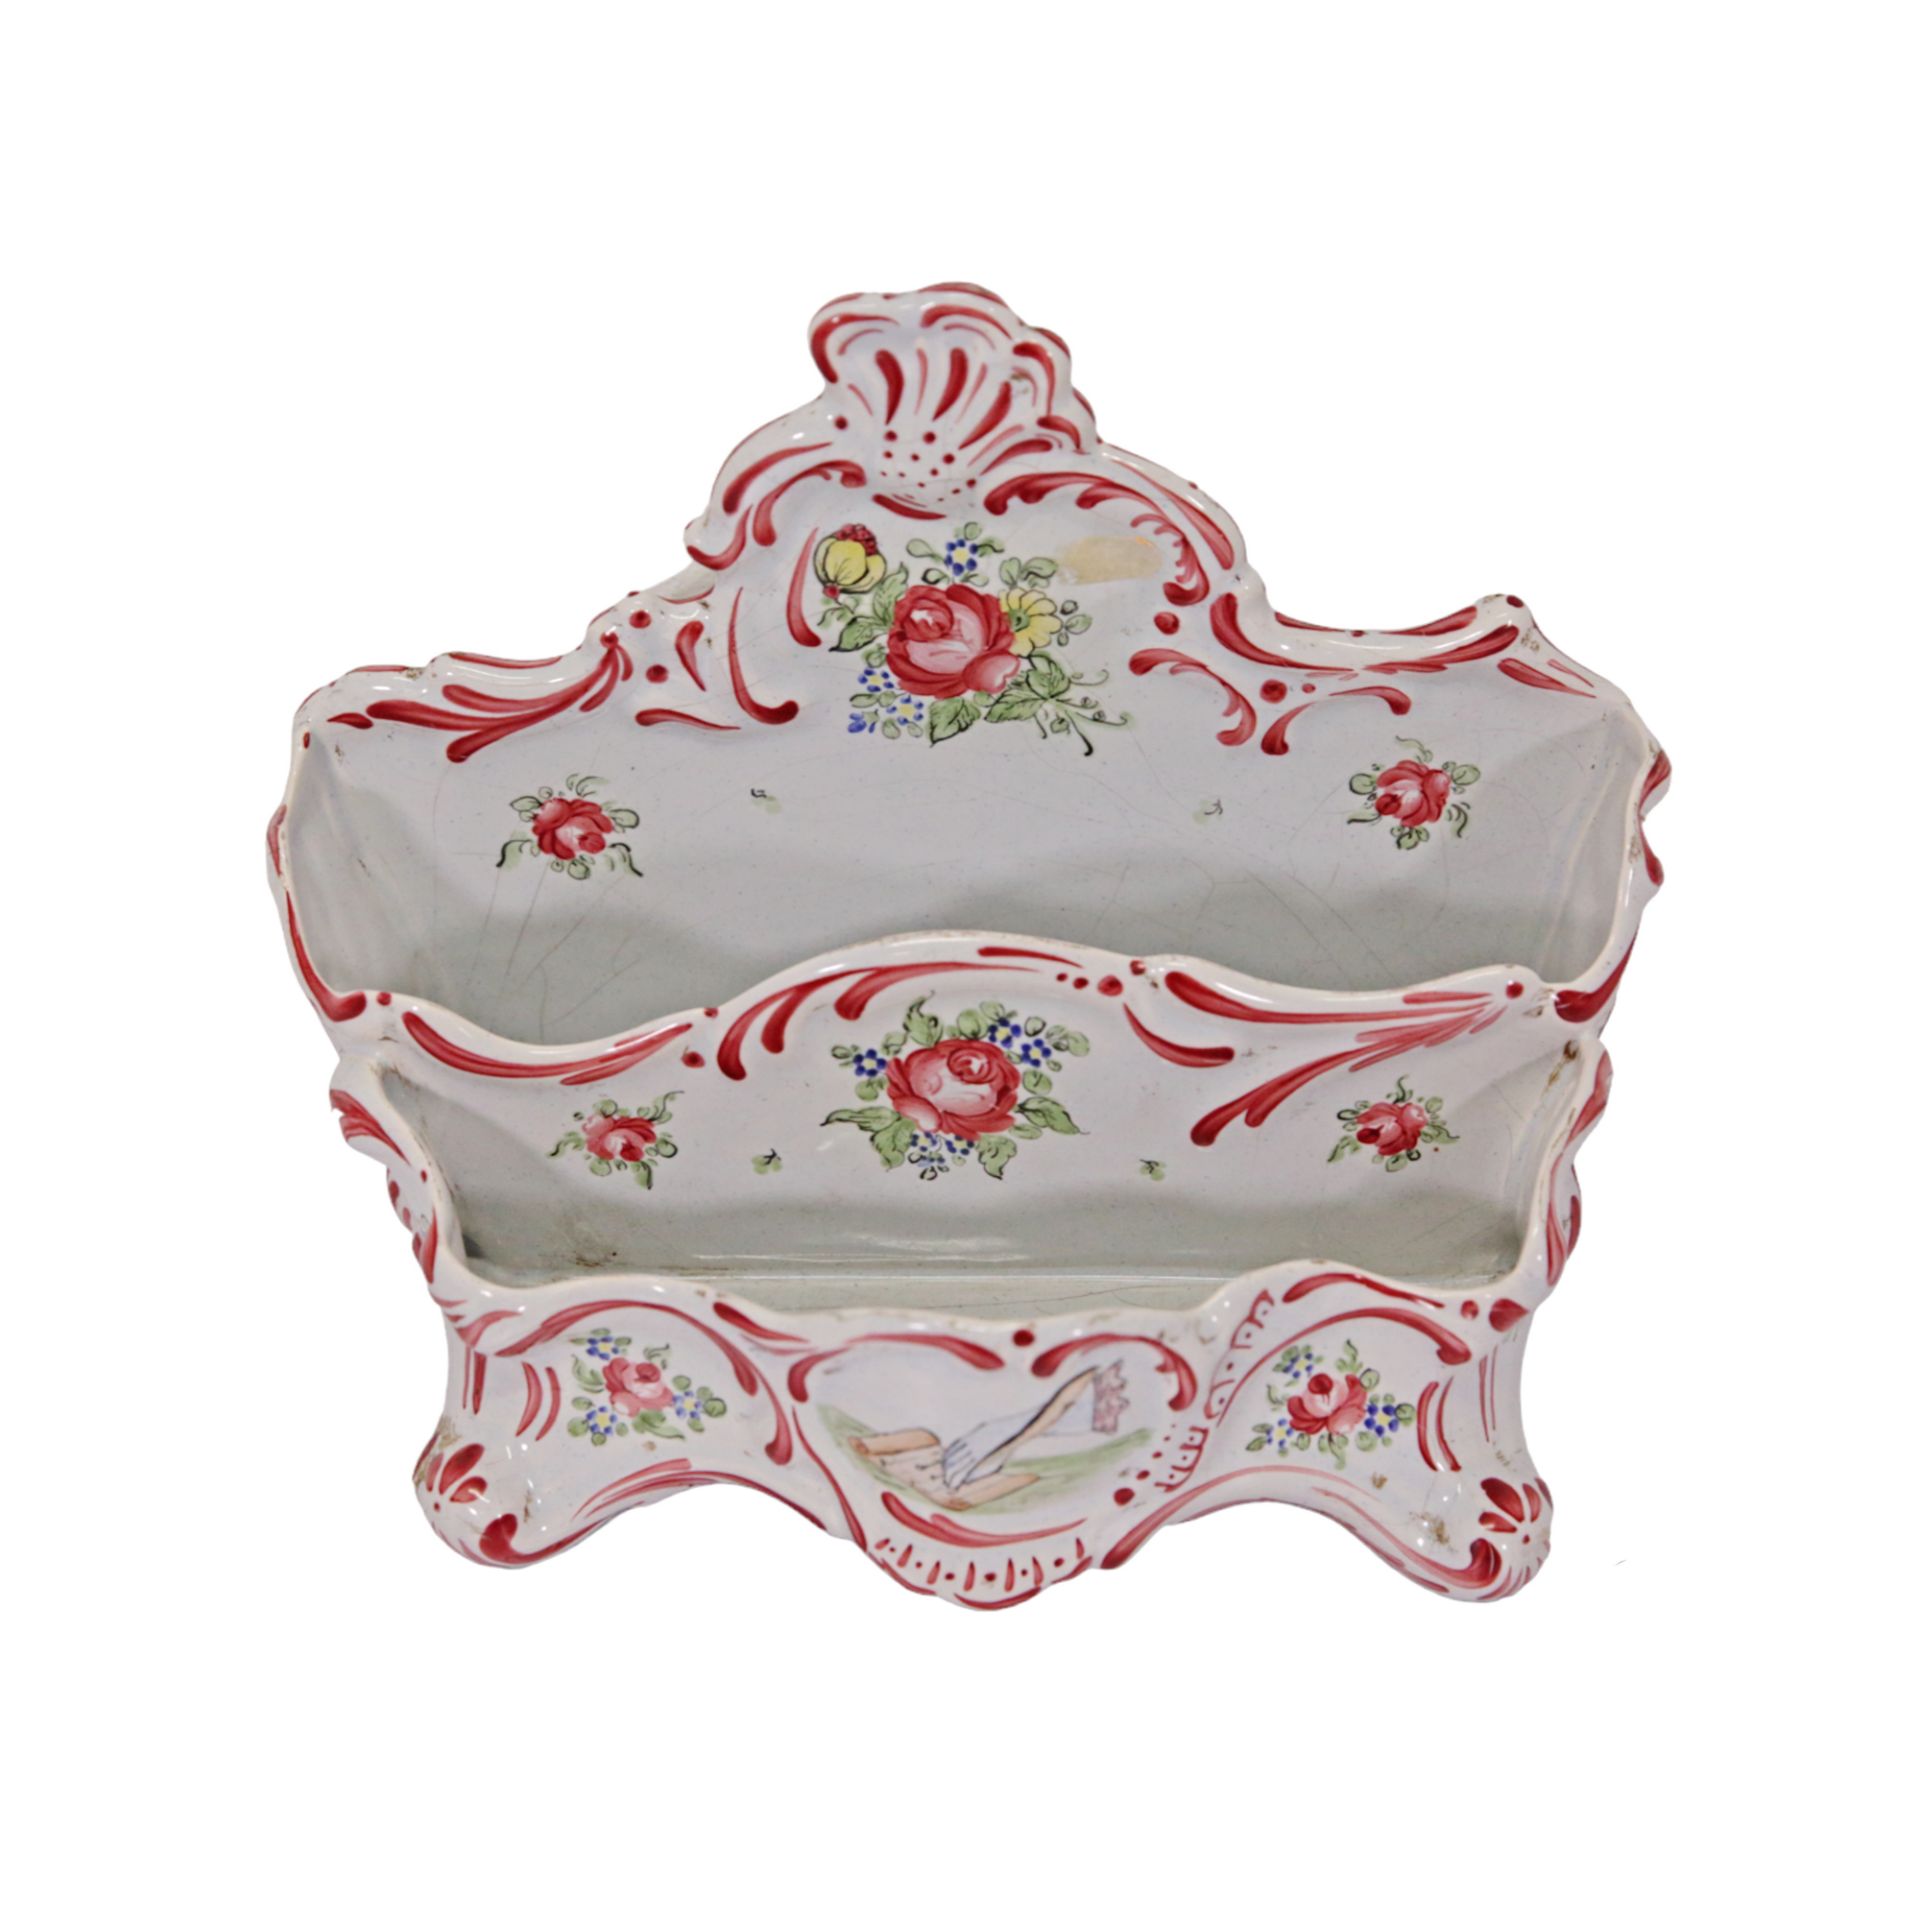 Fine faience letter holder, France, 19th century. Home decor. - Image 2 of 7